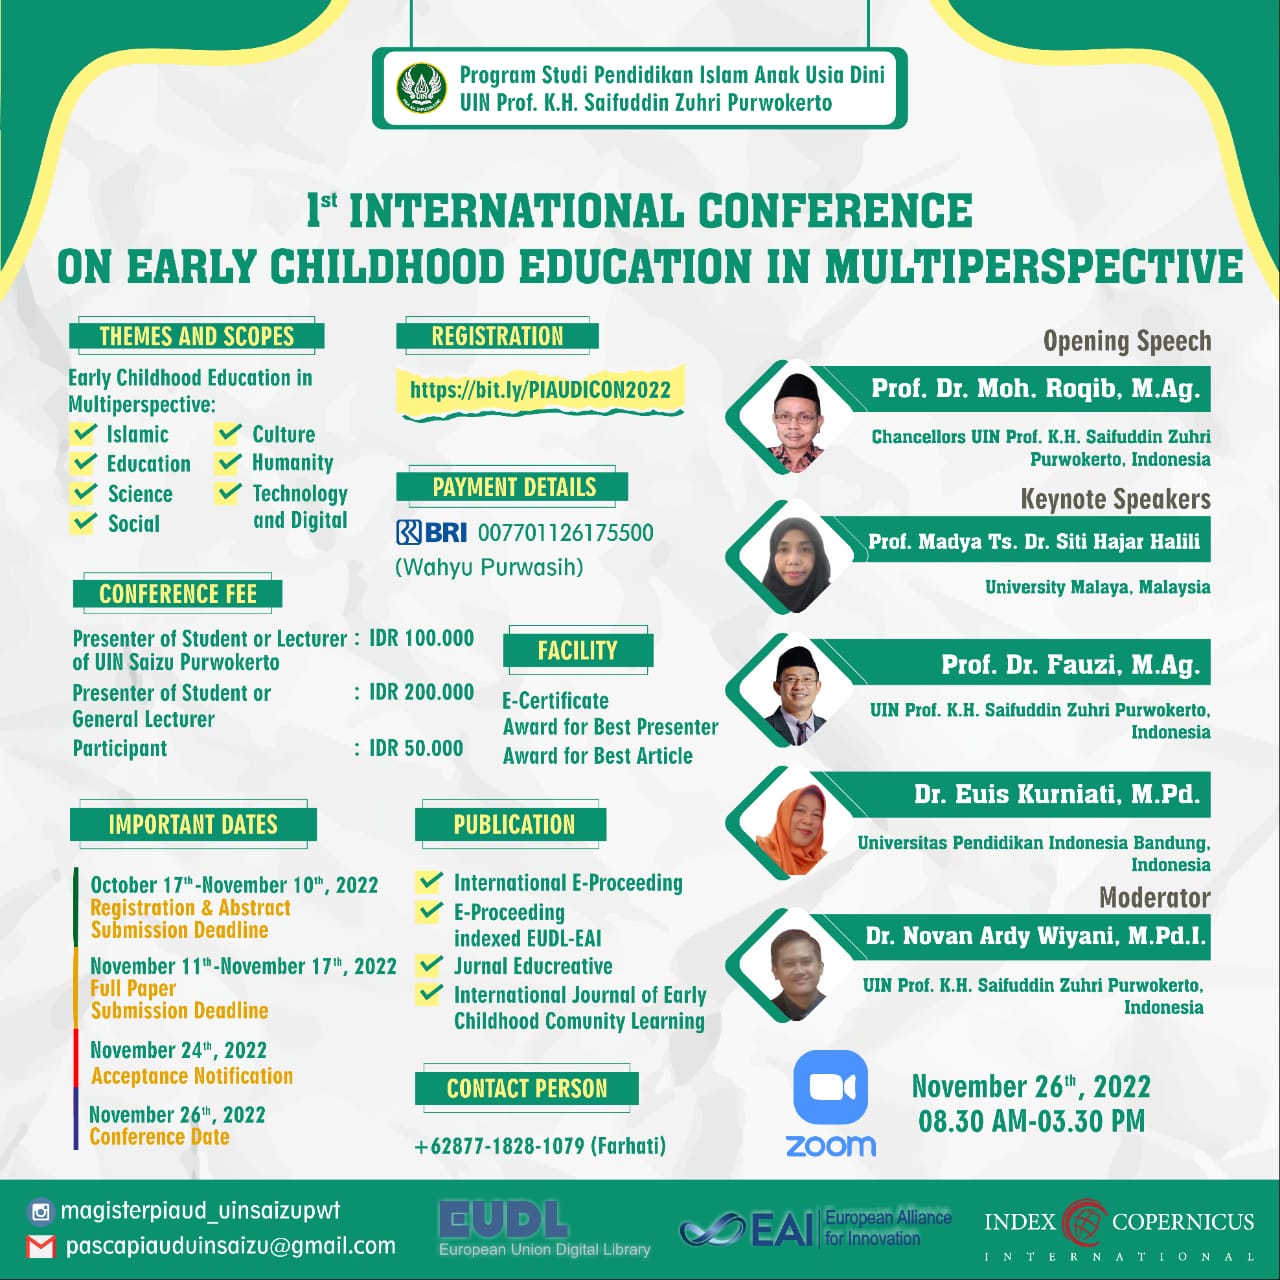 					View 2022: 1st INTERNATIONAL CONFERENCE ON EARLY CHILHOOD EDUCATION IN MULTIPERSPECTIVE
				